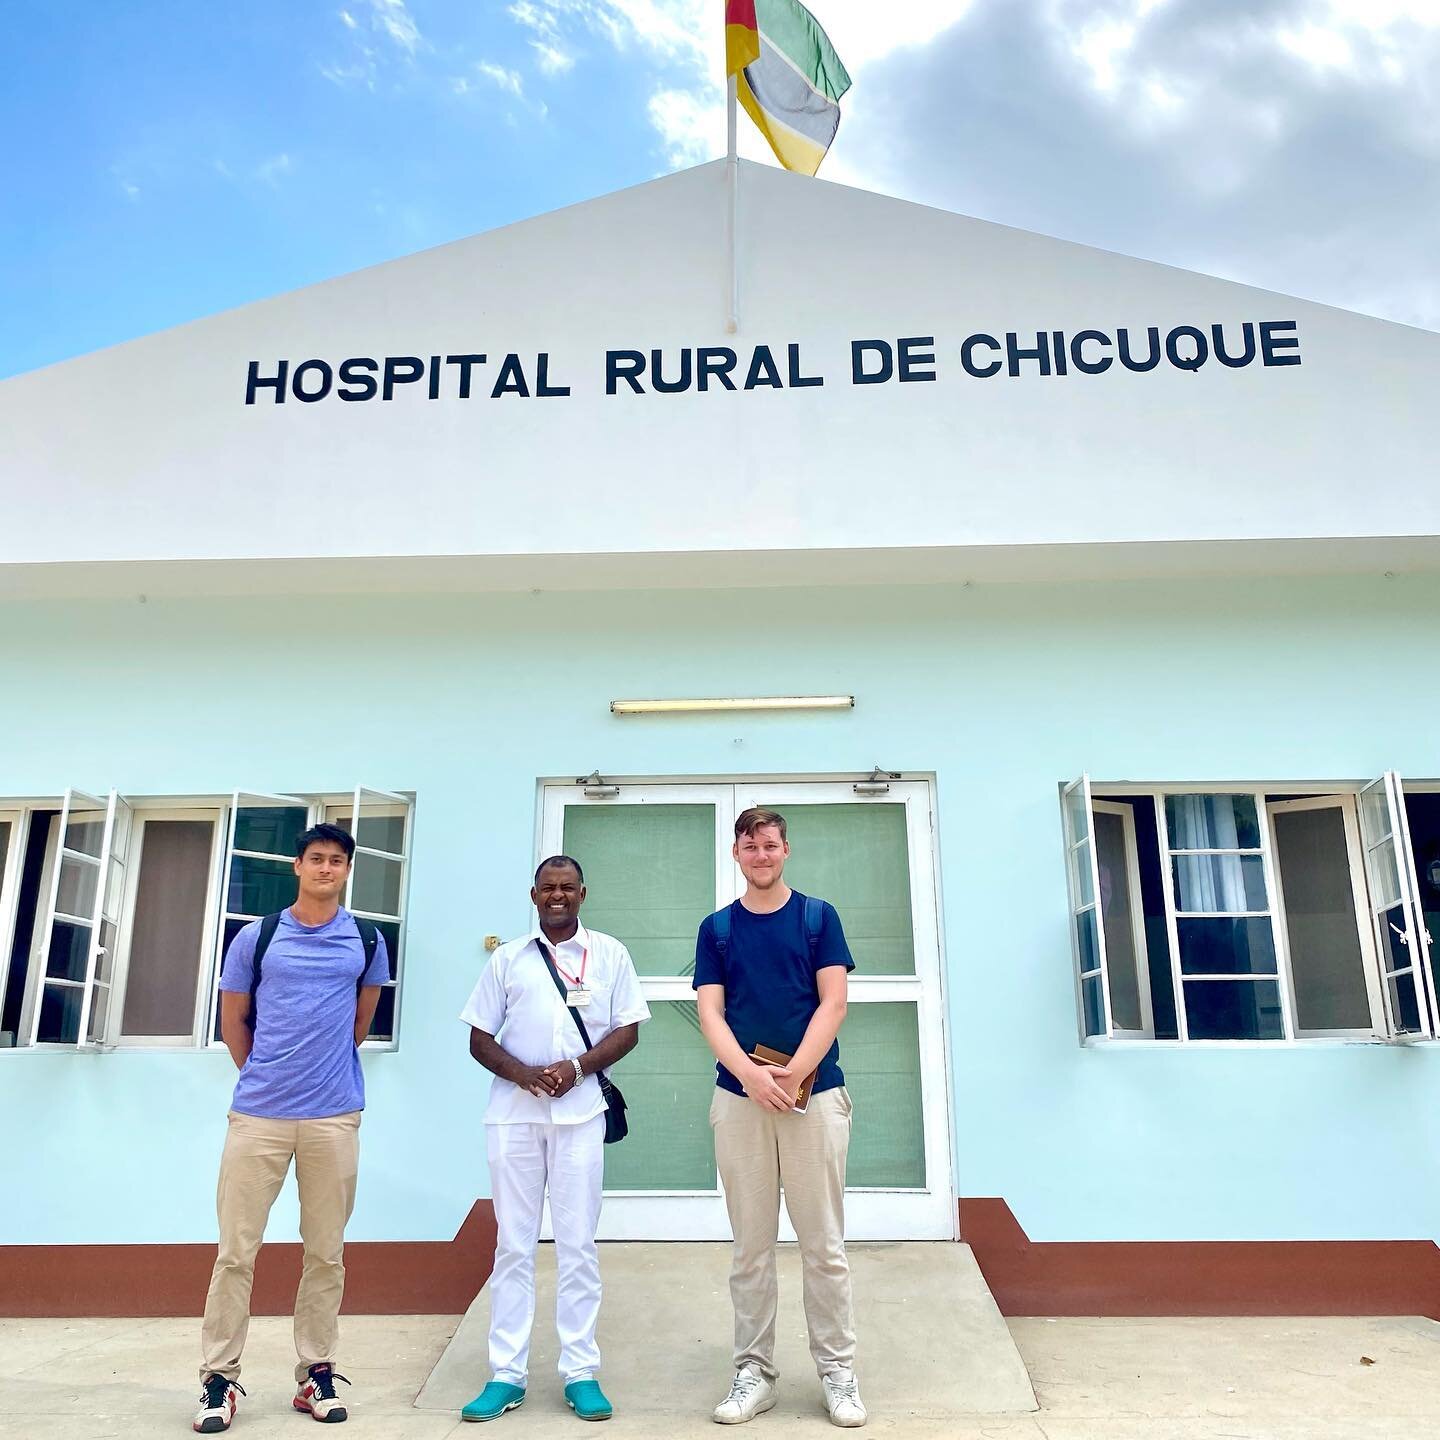 We have very Exciting projects happening in 2024! 🚀
&bull;
First out is the students @nilscarlss0n &amp; @snax_buto from @kthuniversity , are teaming up with Dr. Mikhail, the medical director &amp; medical staff at Chicuque rural hospital in Maxixie